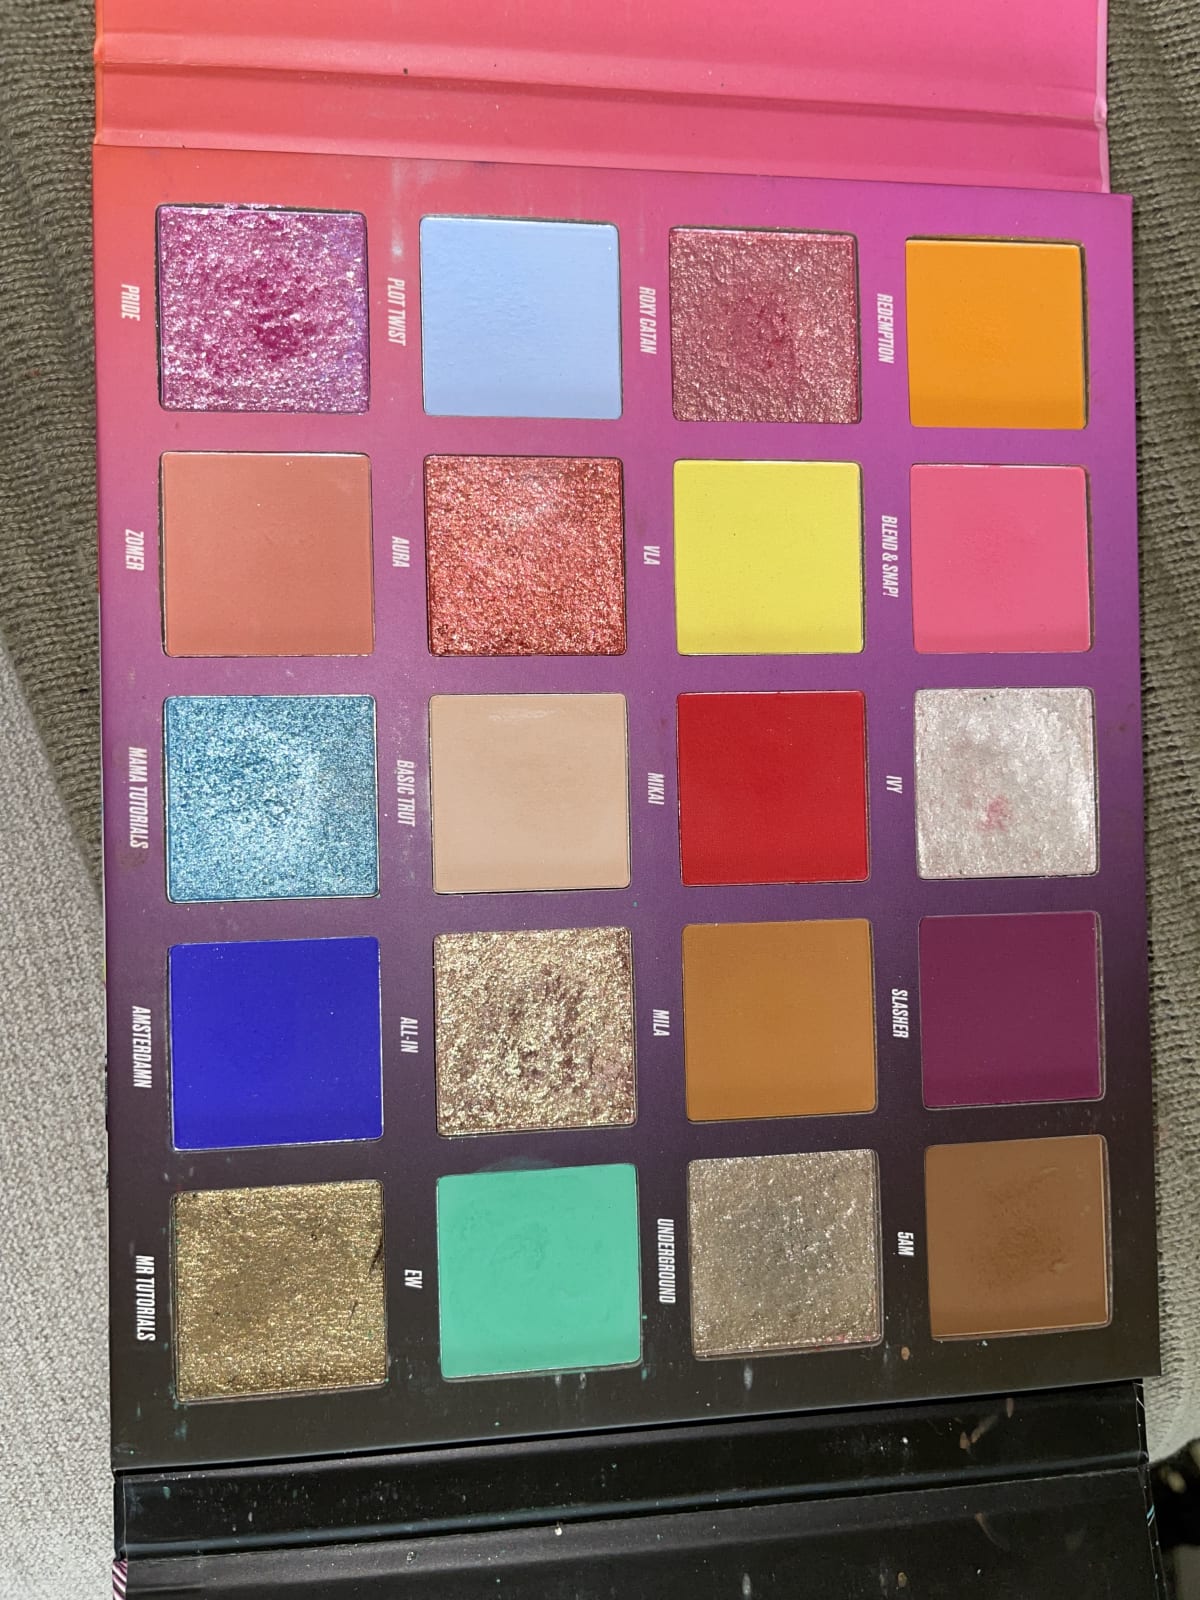 NikkieTutorials X Beauty Bay Pressed Pigment Palette - before review image